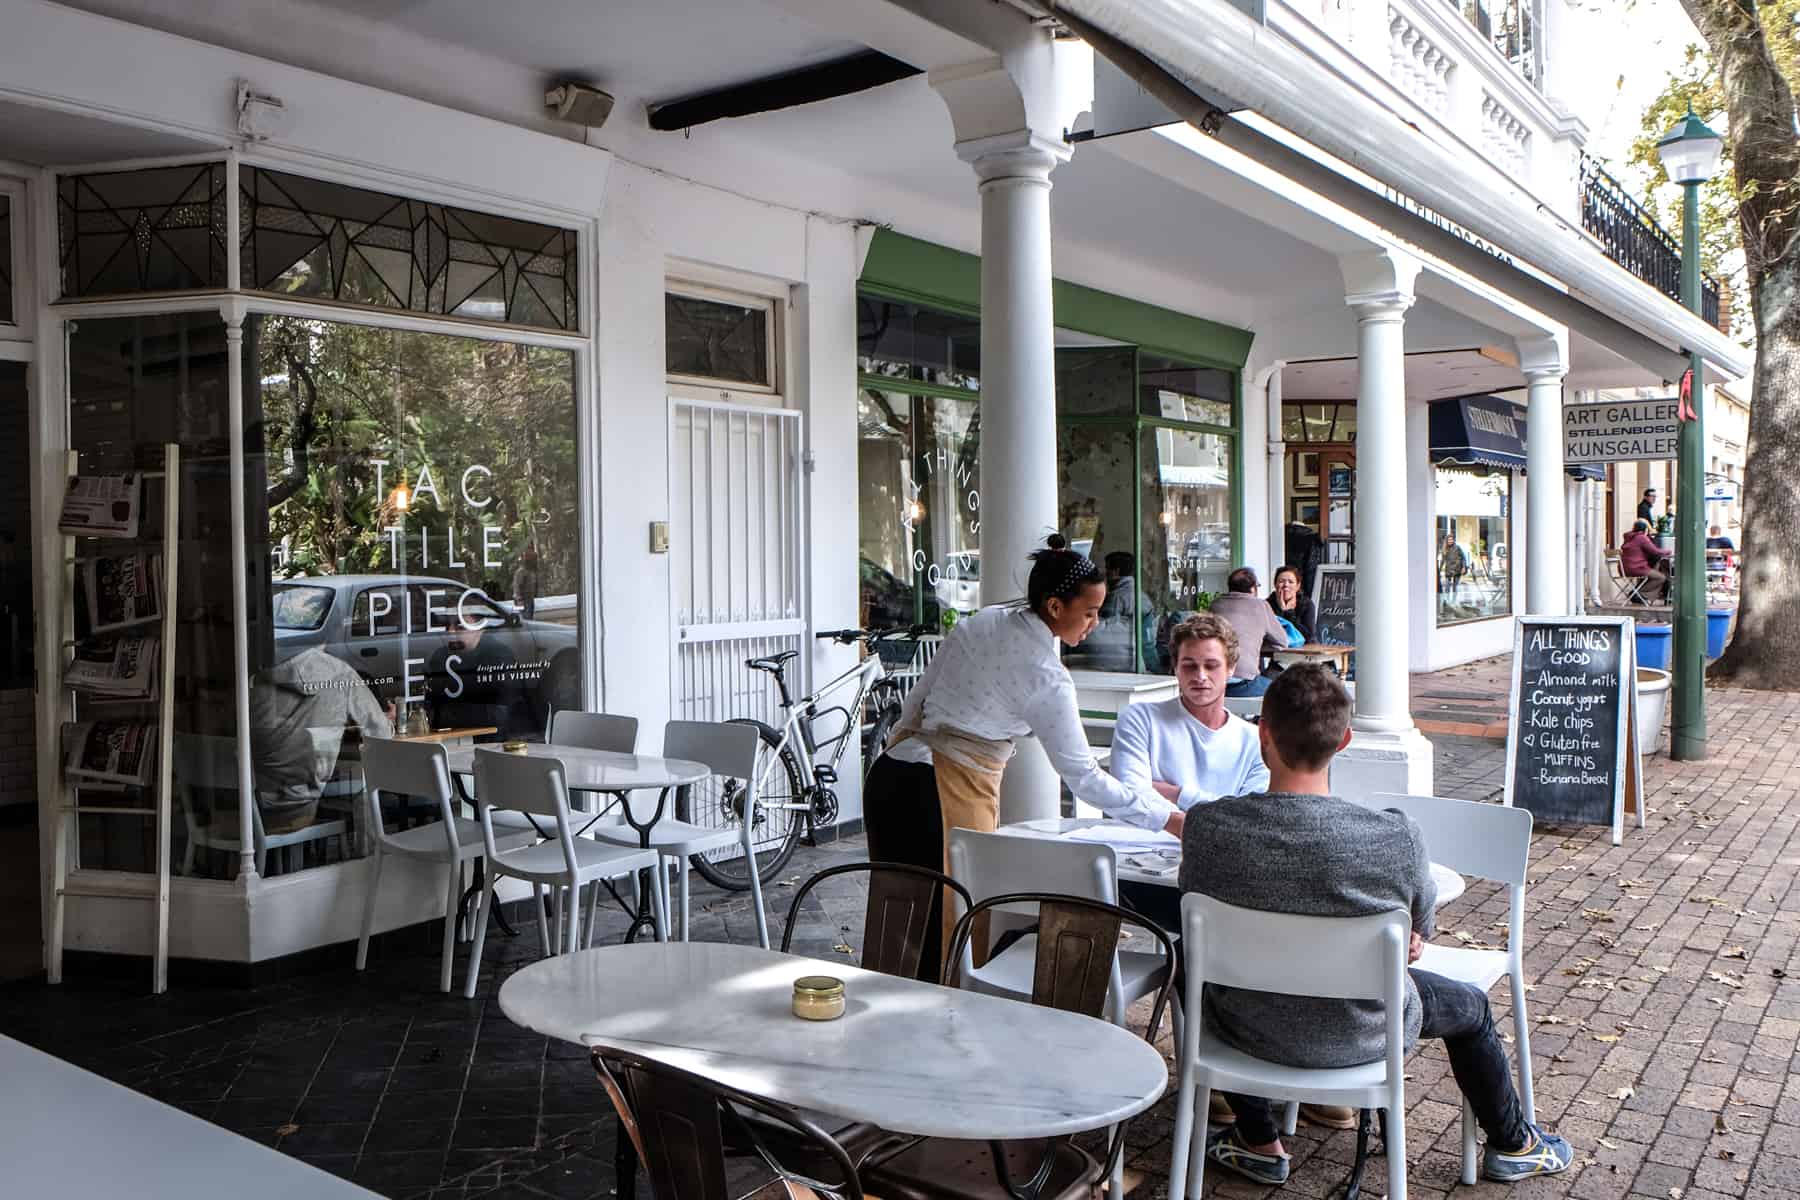 A woman serves two men at a cafe in Stellenbosch. The buildings, columns, table and chairs are all a bright white